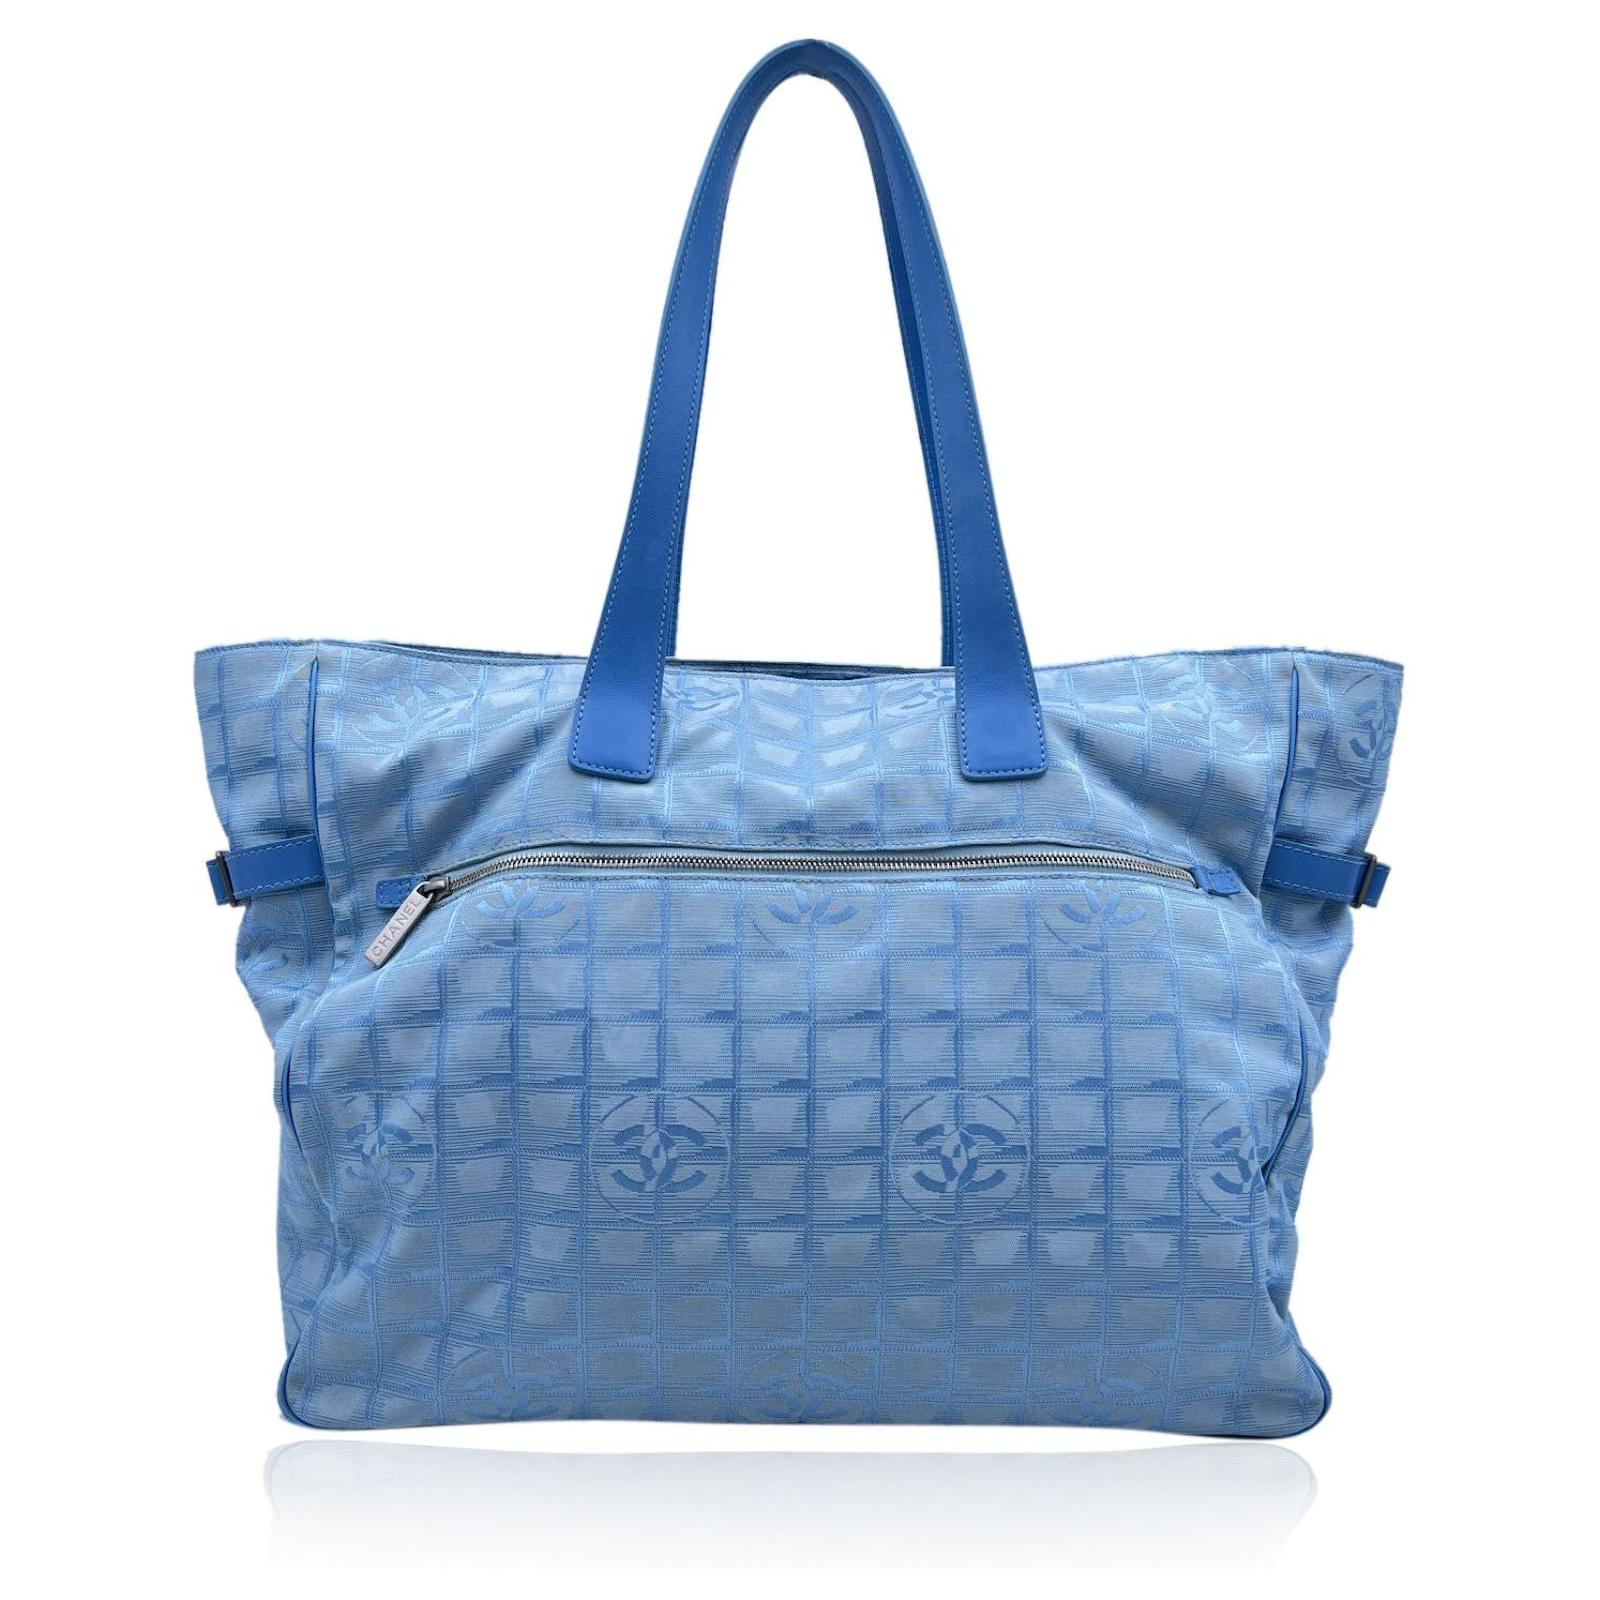 CHANEL Baby Blue Jacquard Travel Line Canvas Tote Bag